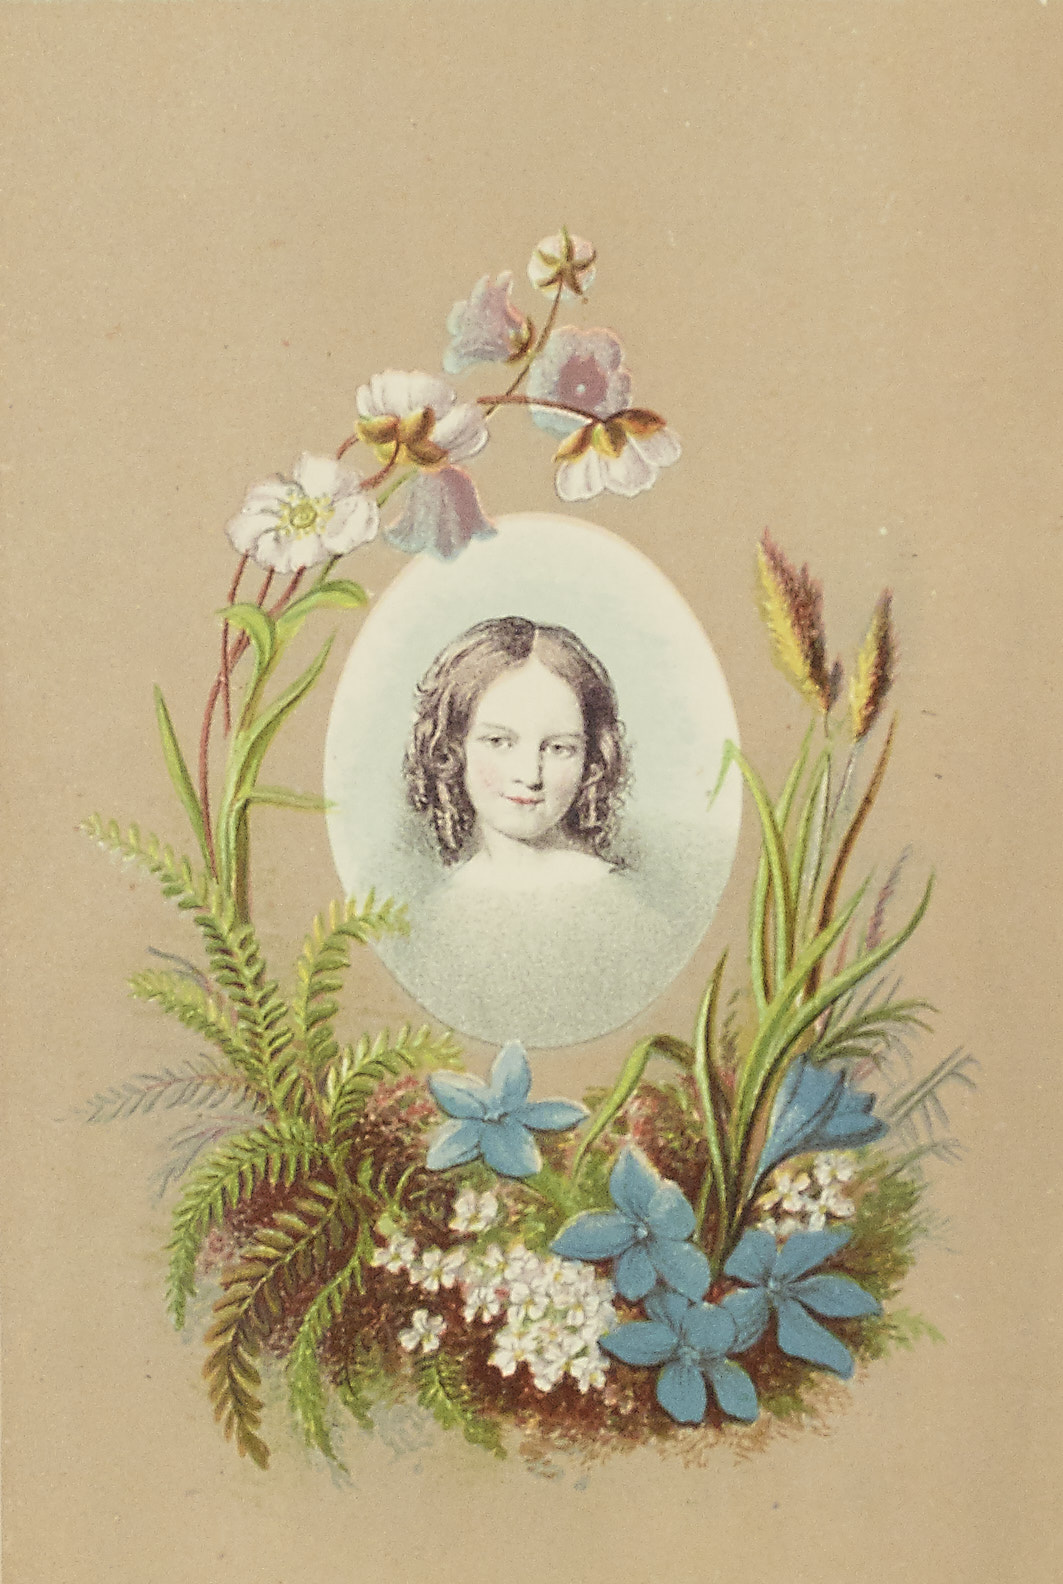 Decorative drawing of composer as a child.